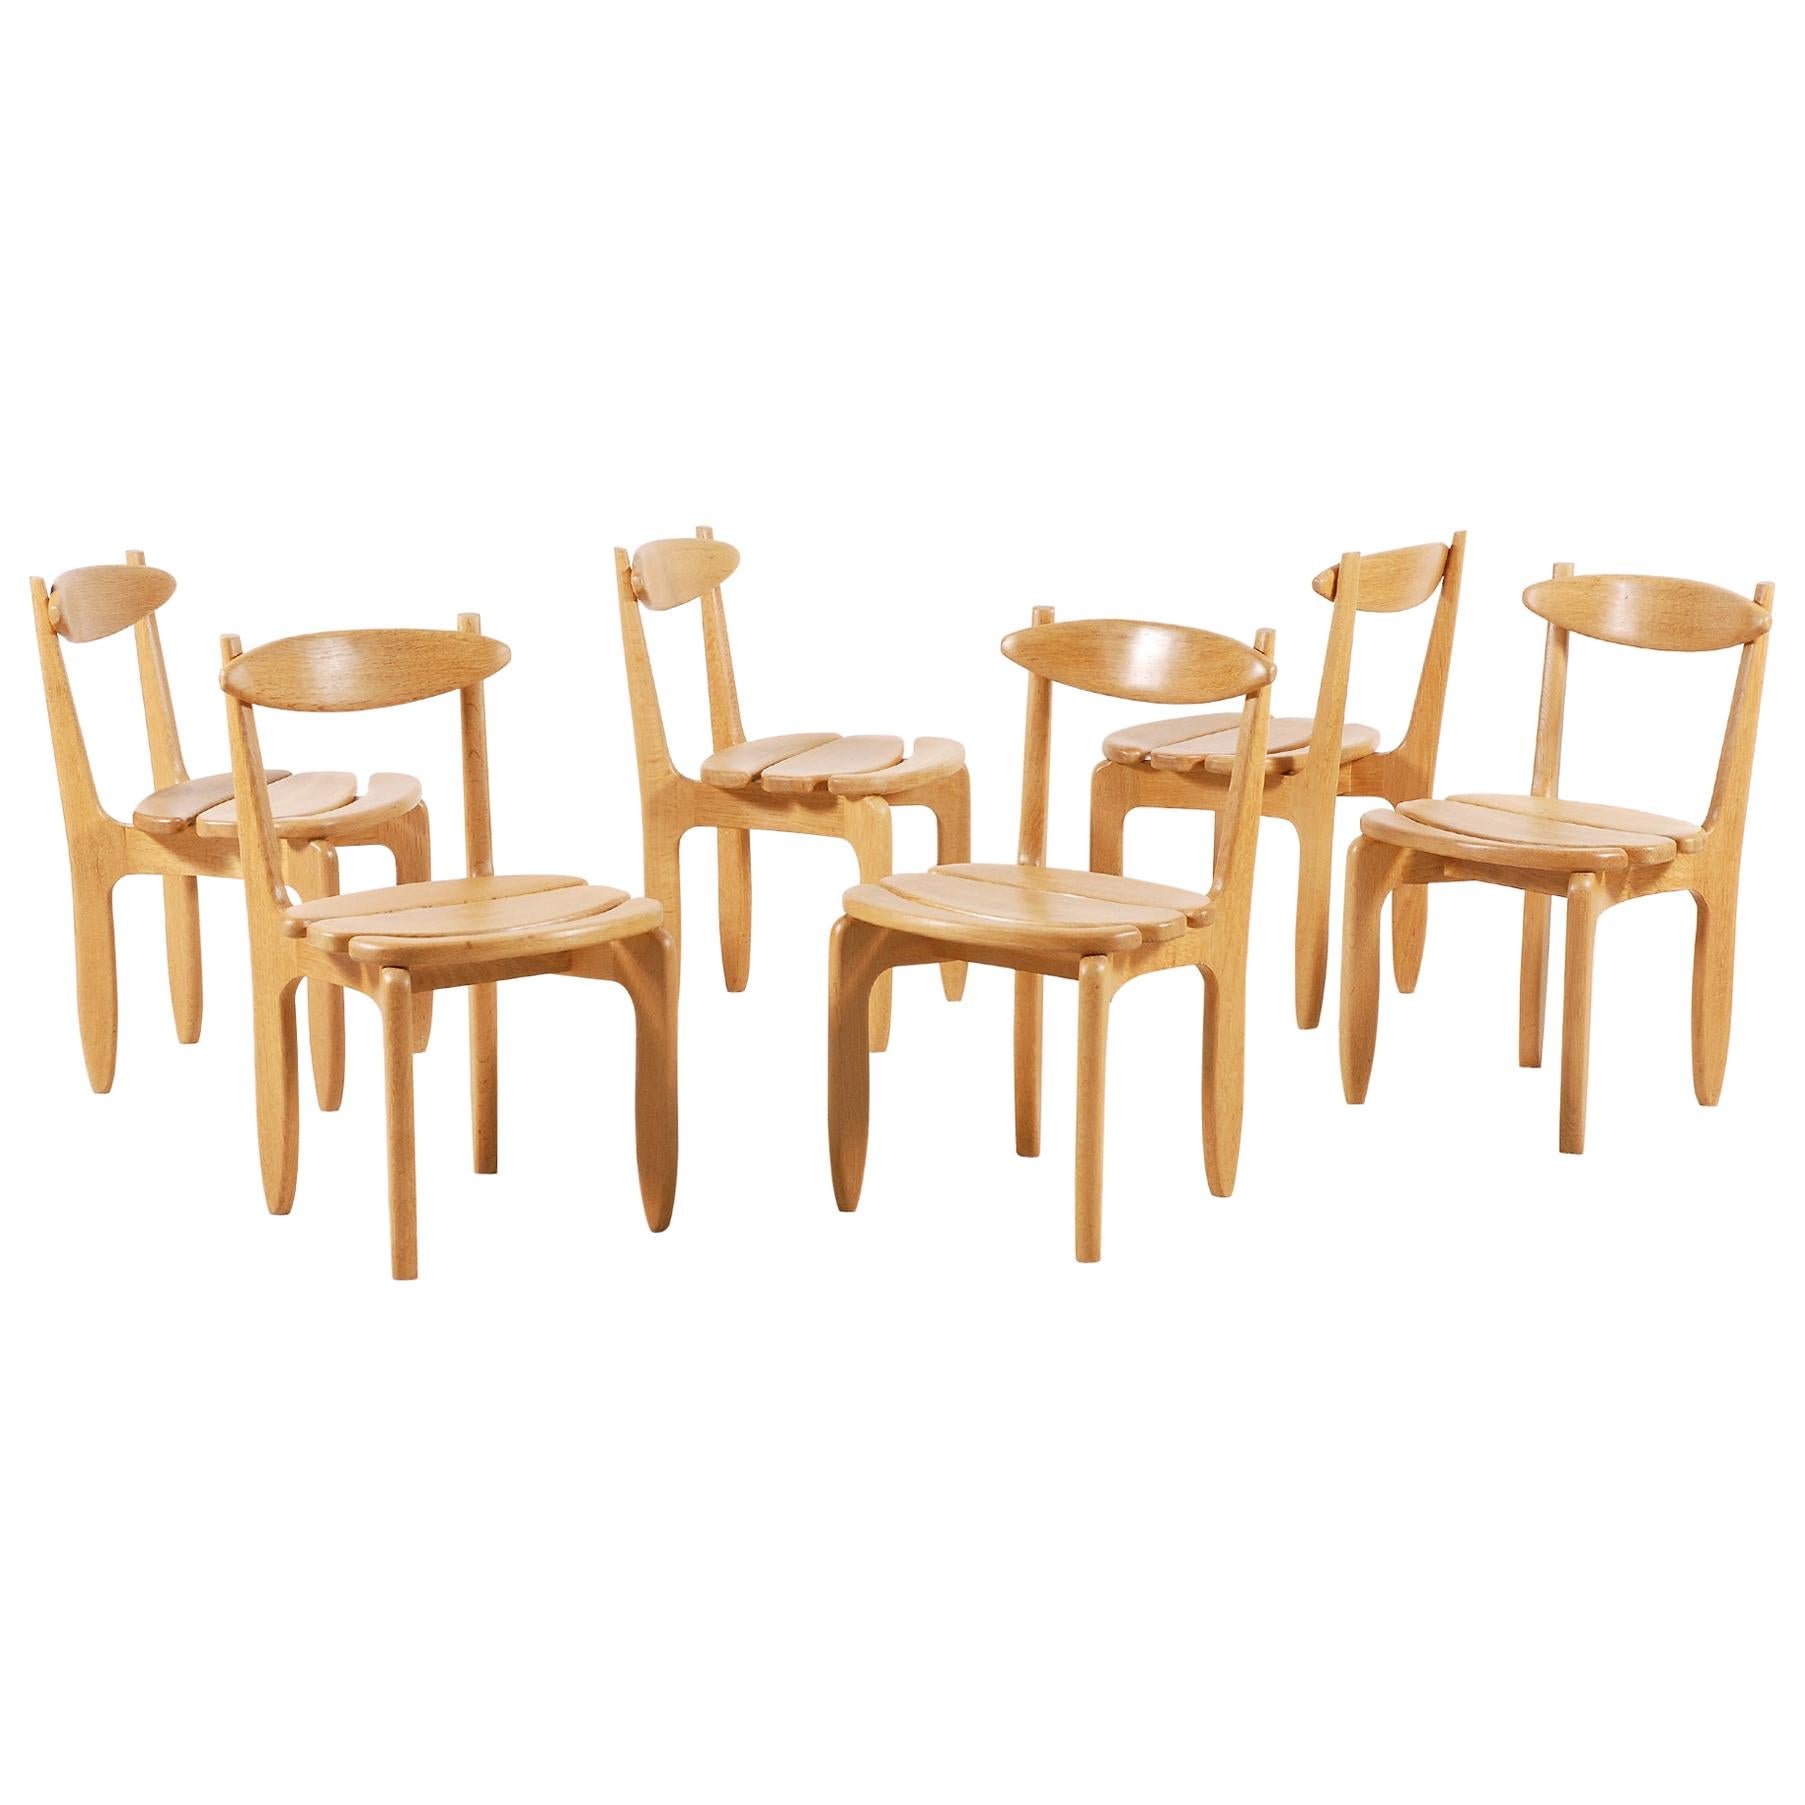 Guillerme and Chambron, Set of 6 "Thierry" Dining Chairs, for Votre Maison, 1960